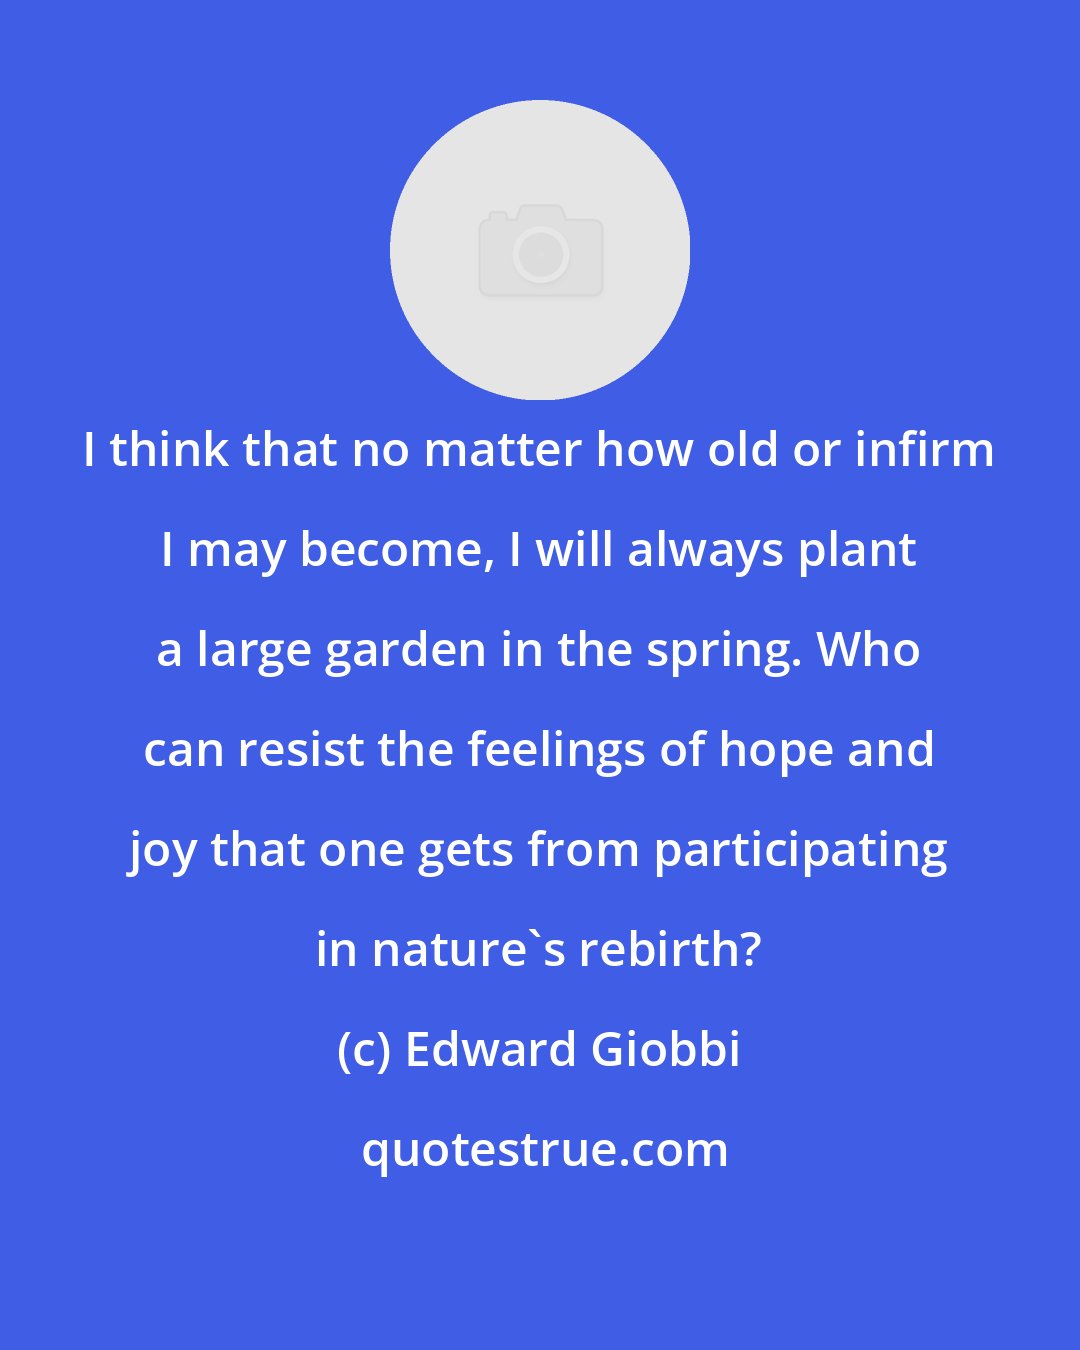 Edward Giobbi: I think that no matter how old or infirm I may become, I will always plant a large garden in the spring. Who can resist the feelings of hope and joy that one gets from participating in nature's rebirth?